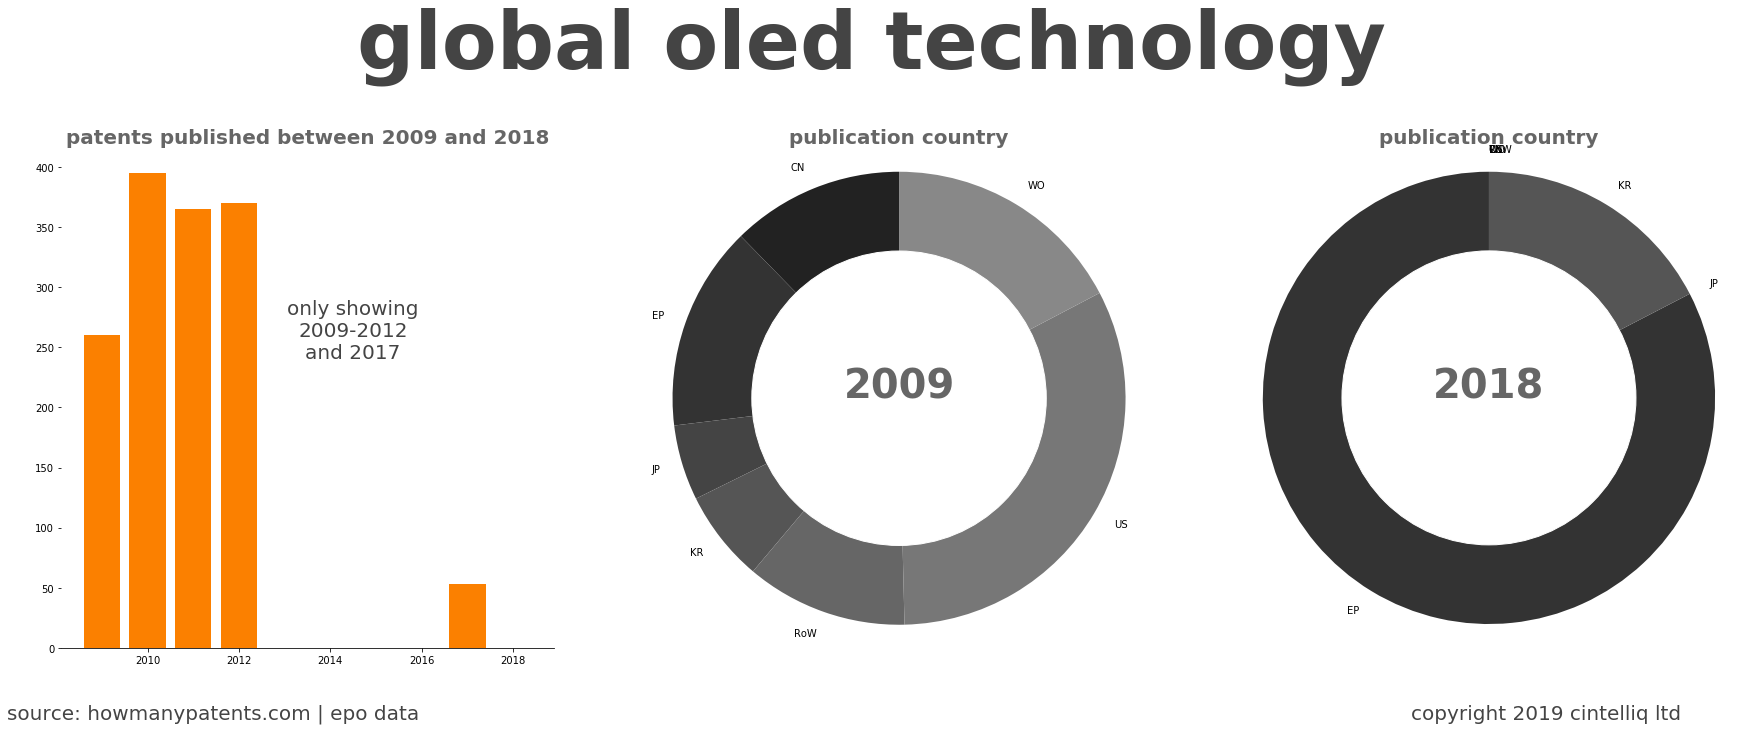 summary of patents for Global Oled Technology